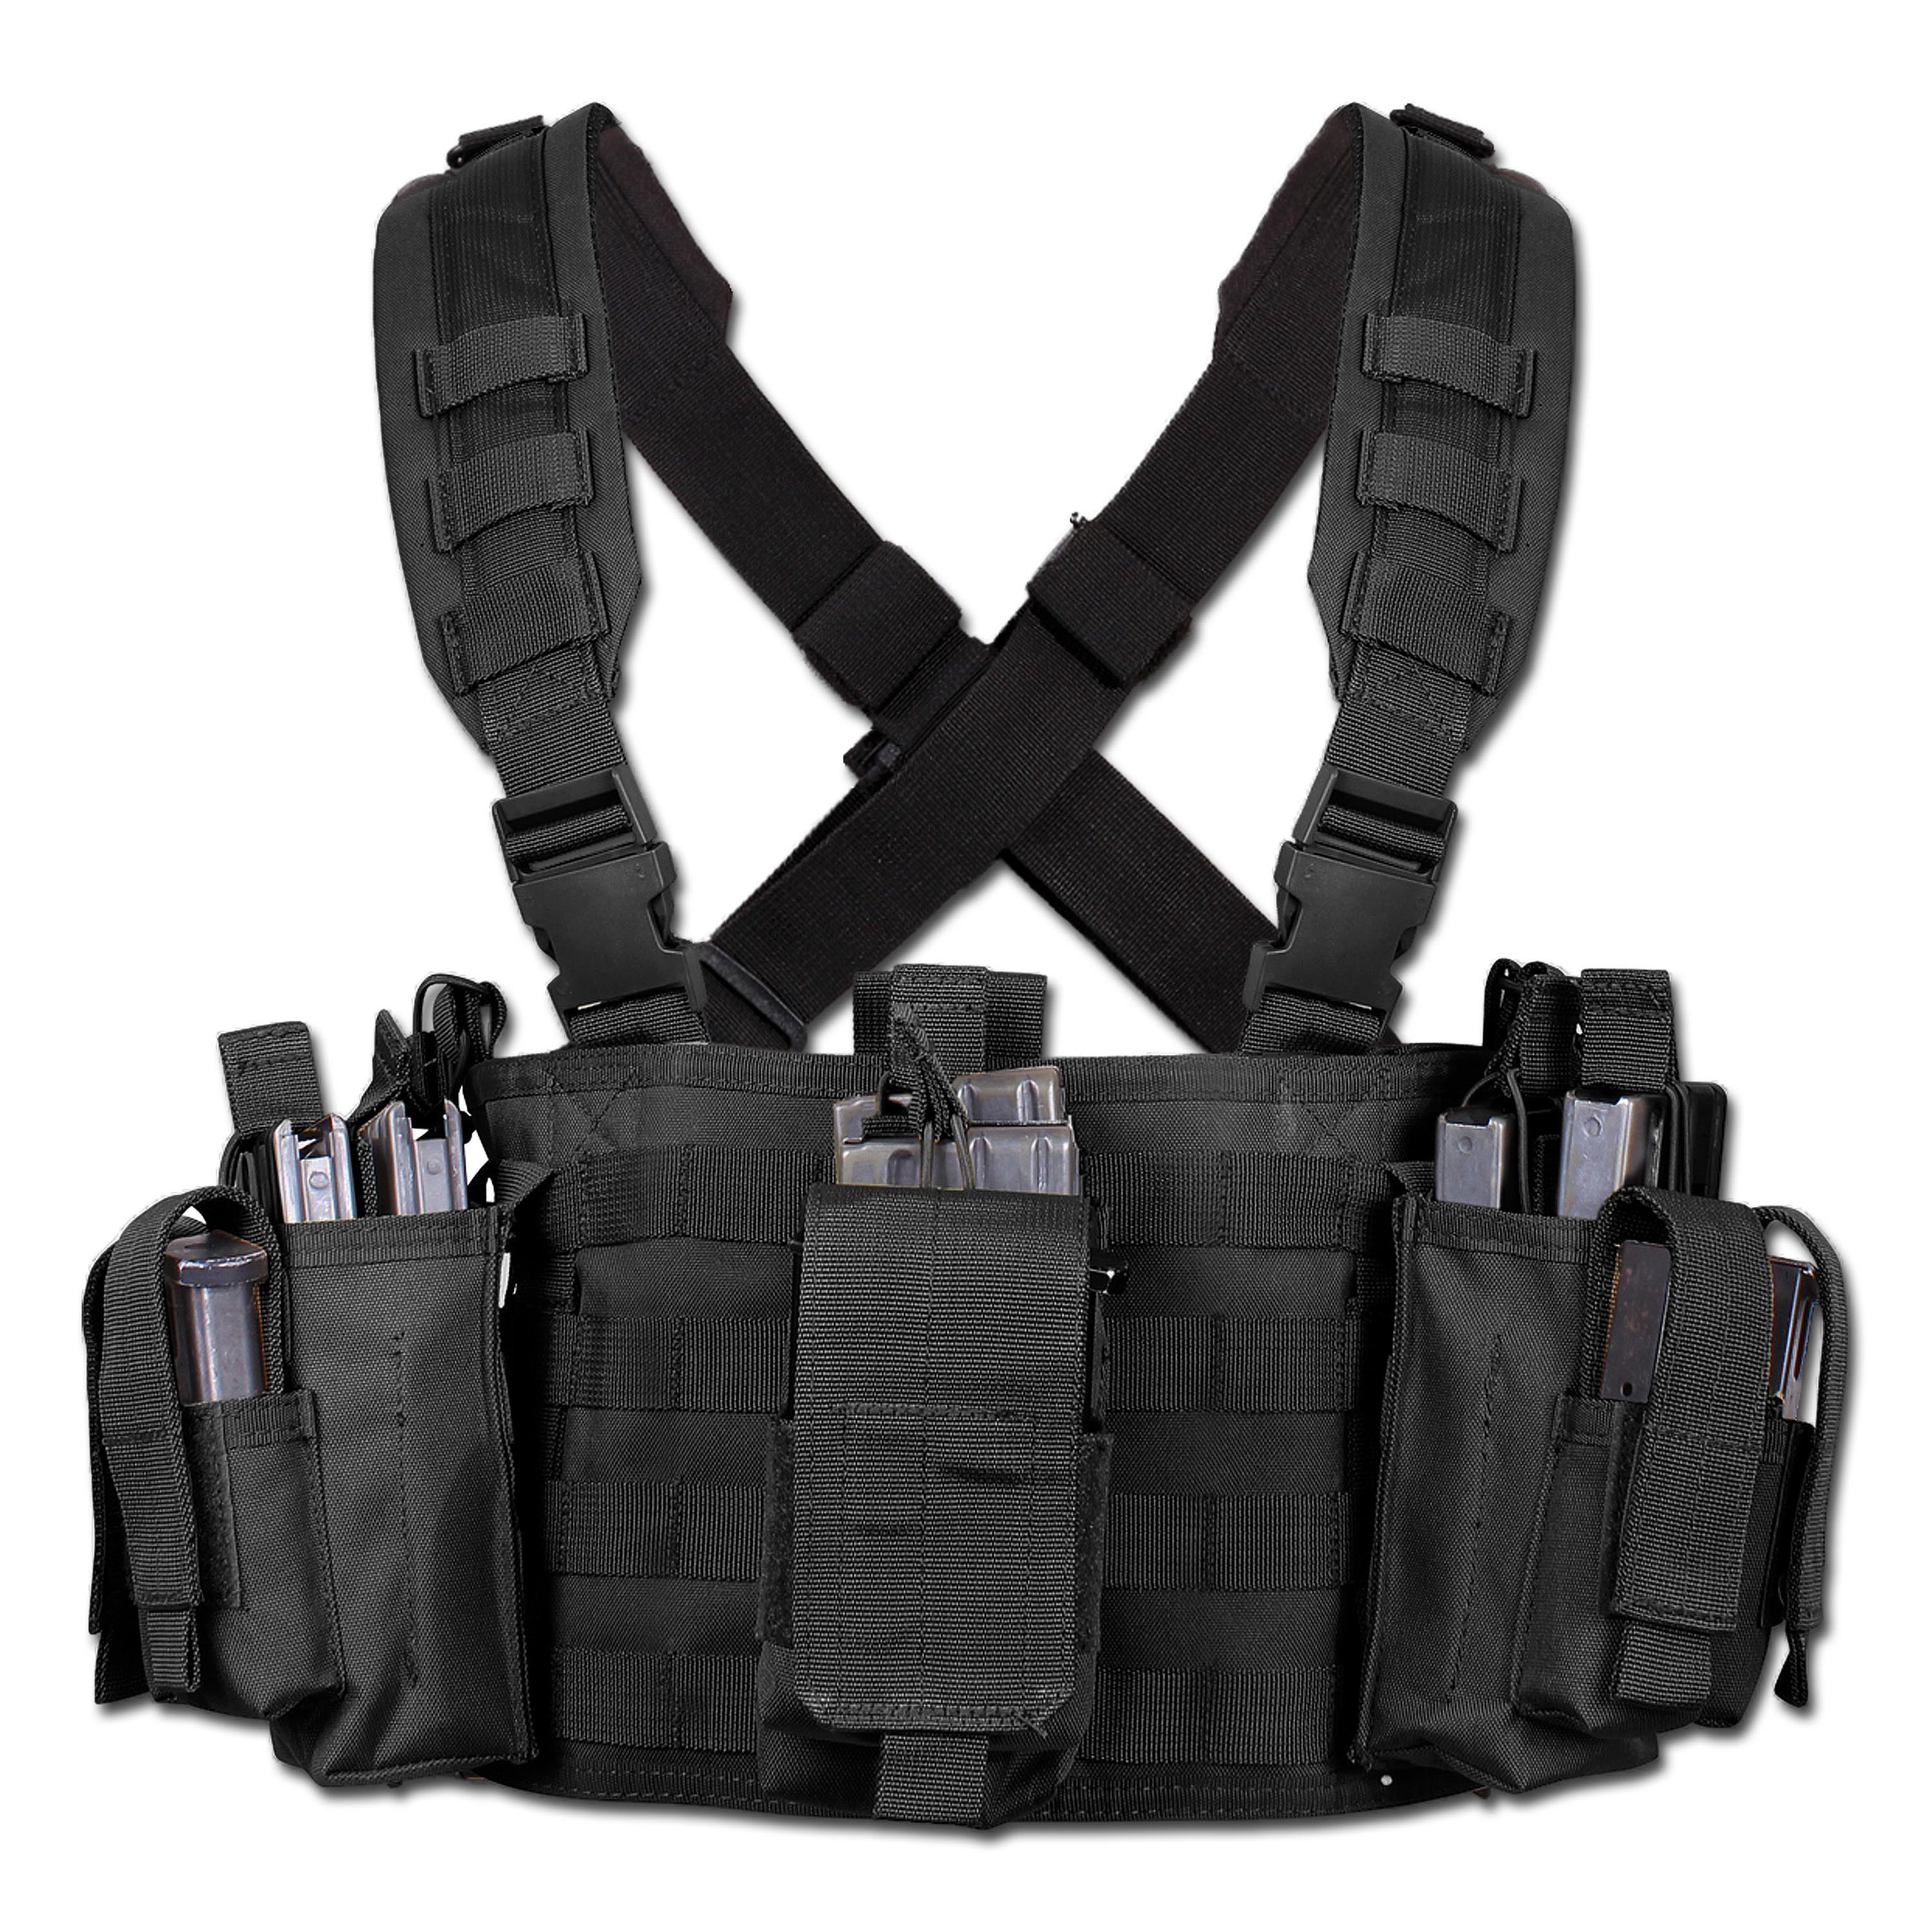 Chest Rig Rothco Operators Tactical black | Chest Rig Rothco Operators ...